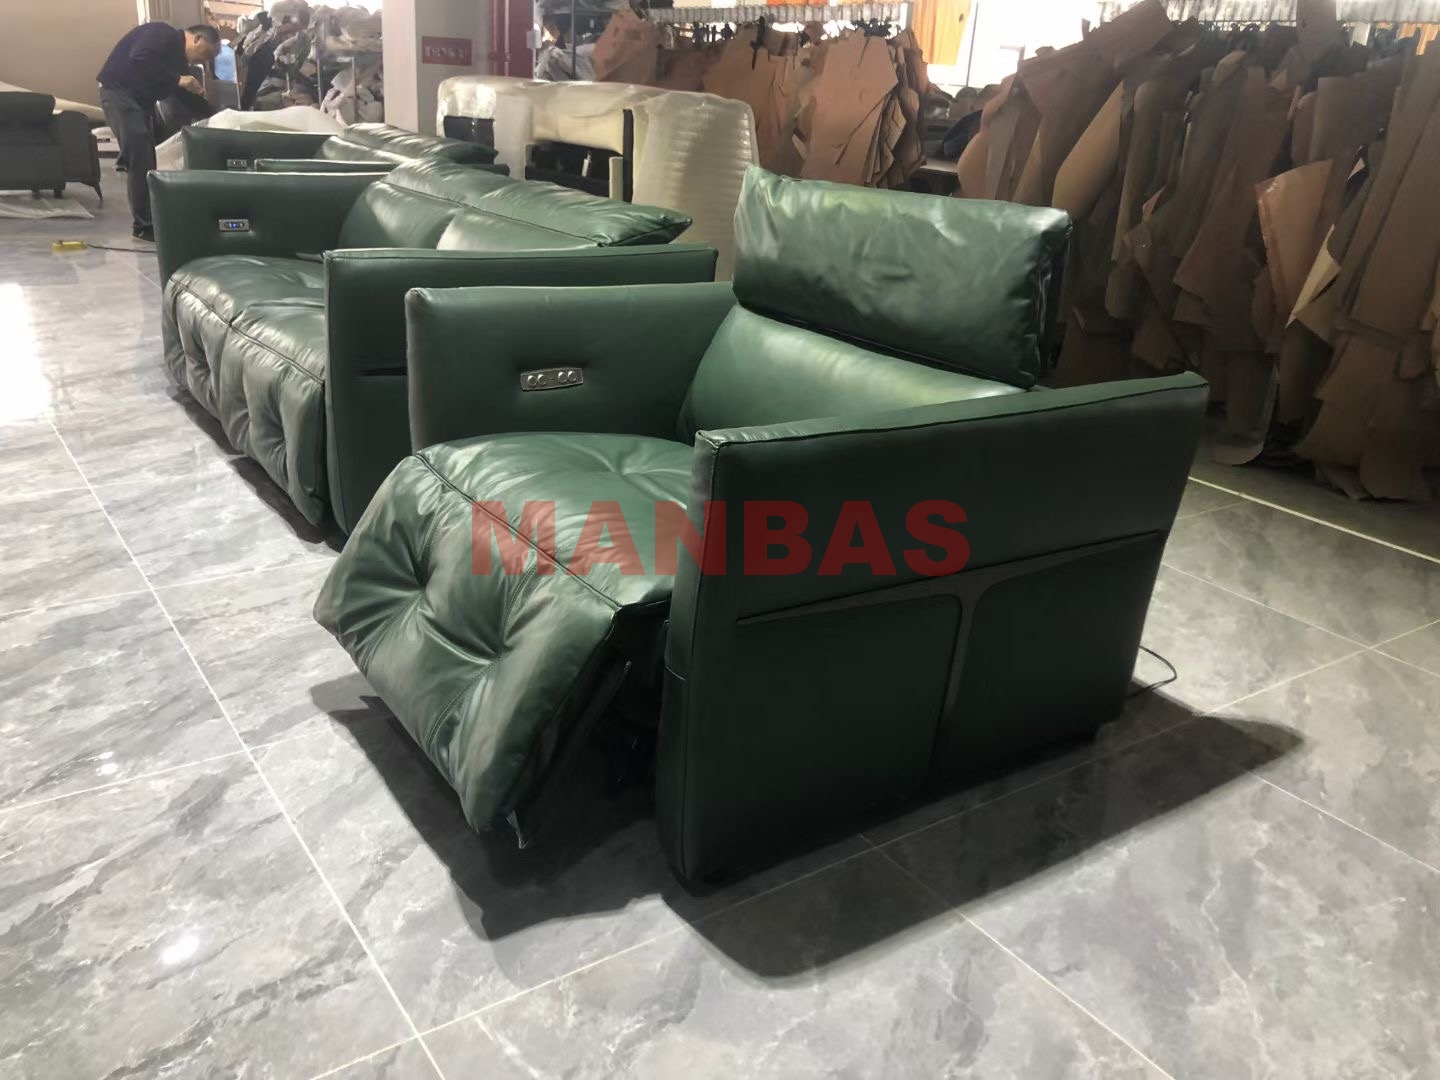 MANBAS Dual Motor Power Recliners Multifunctional Sofa Sets Electric Reclining Seats Italian Genuine Leather Sofas Theater Couch